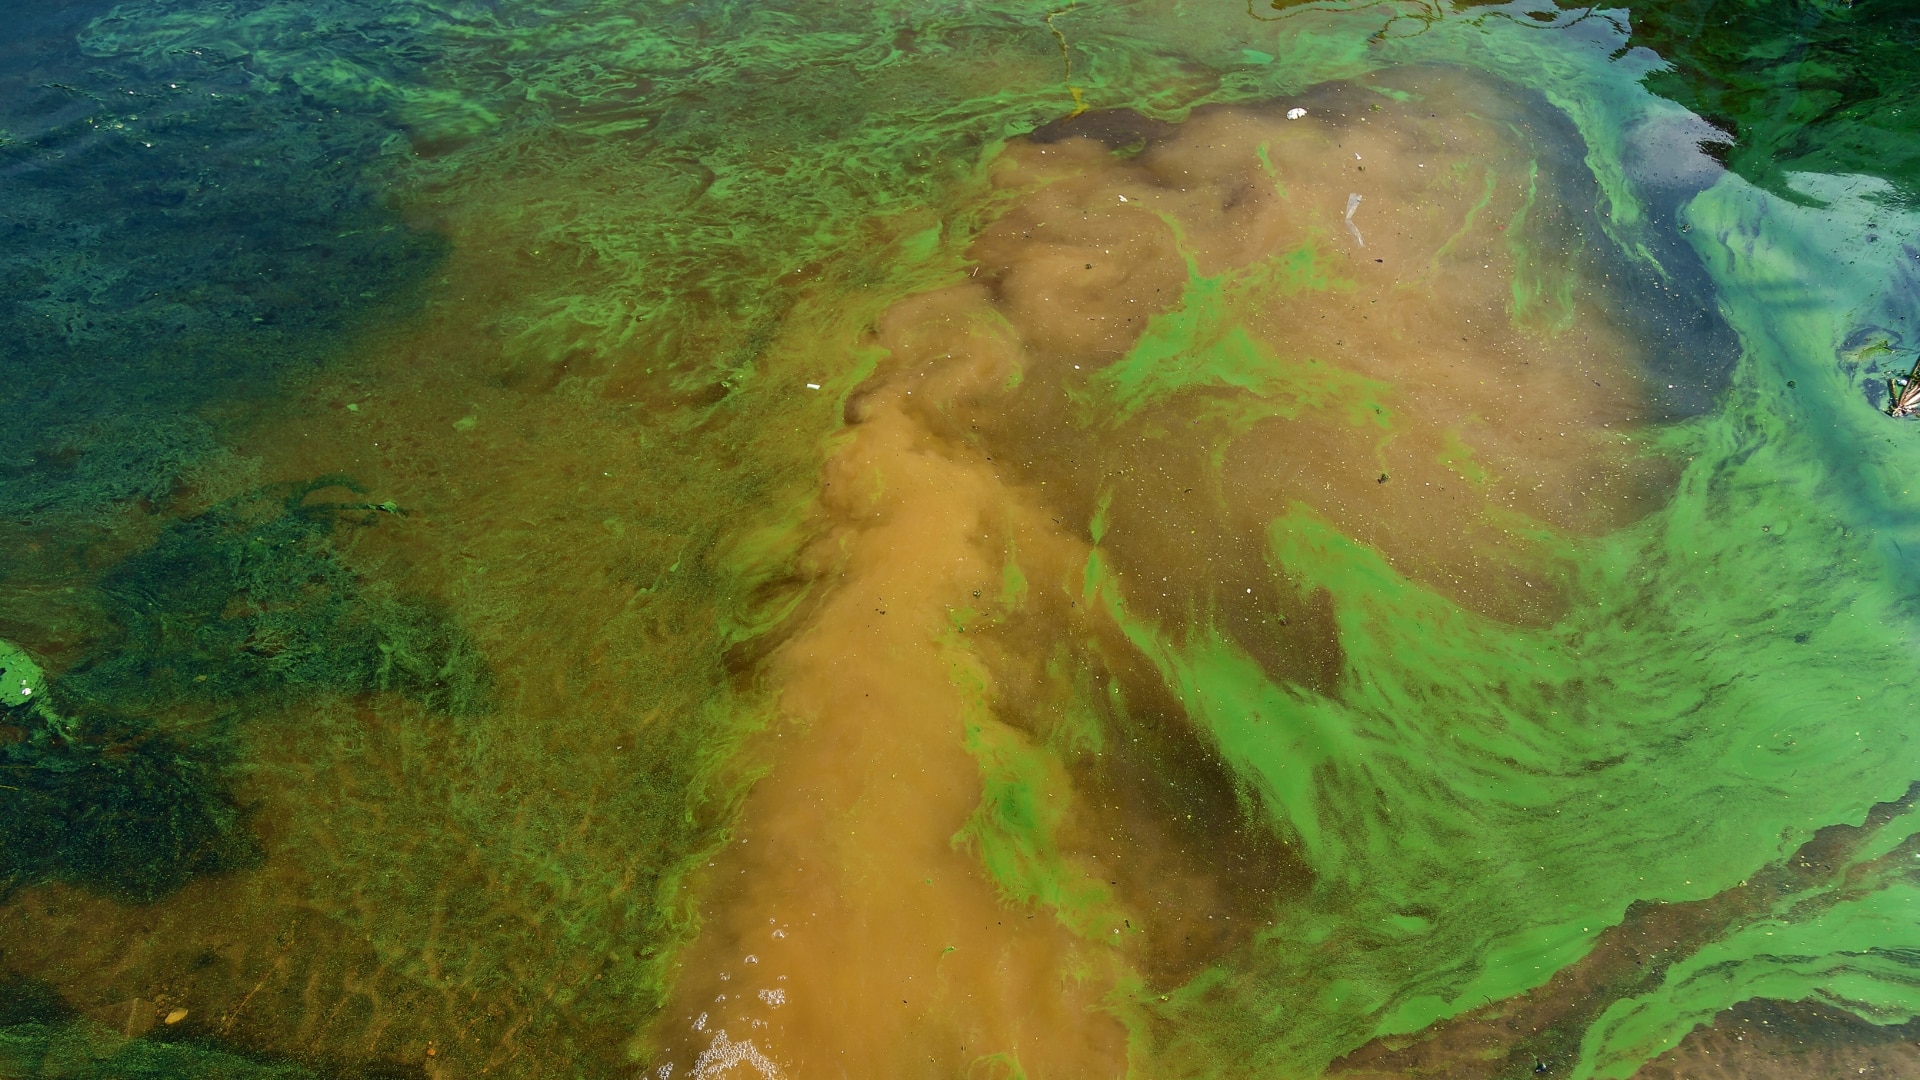 A webinar hosted for people to understand the different types of algae, its causes and impact on the environment and types of technologies used to combat it.